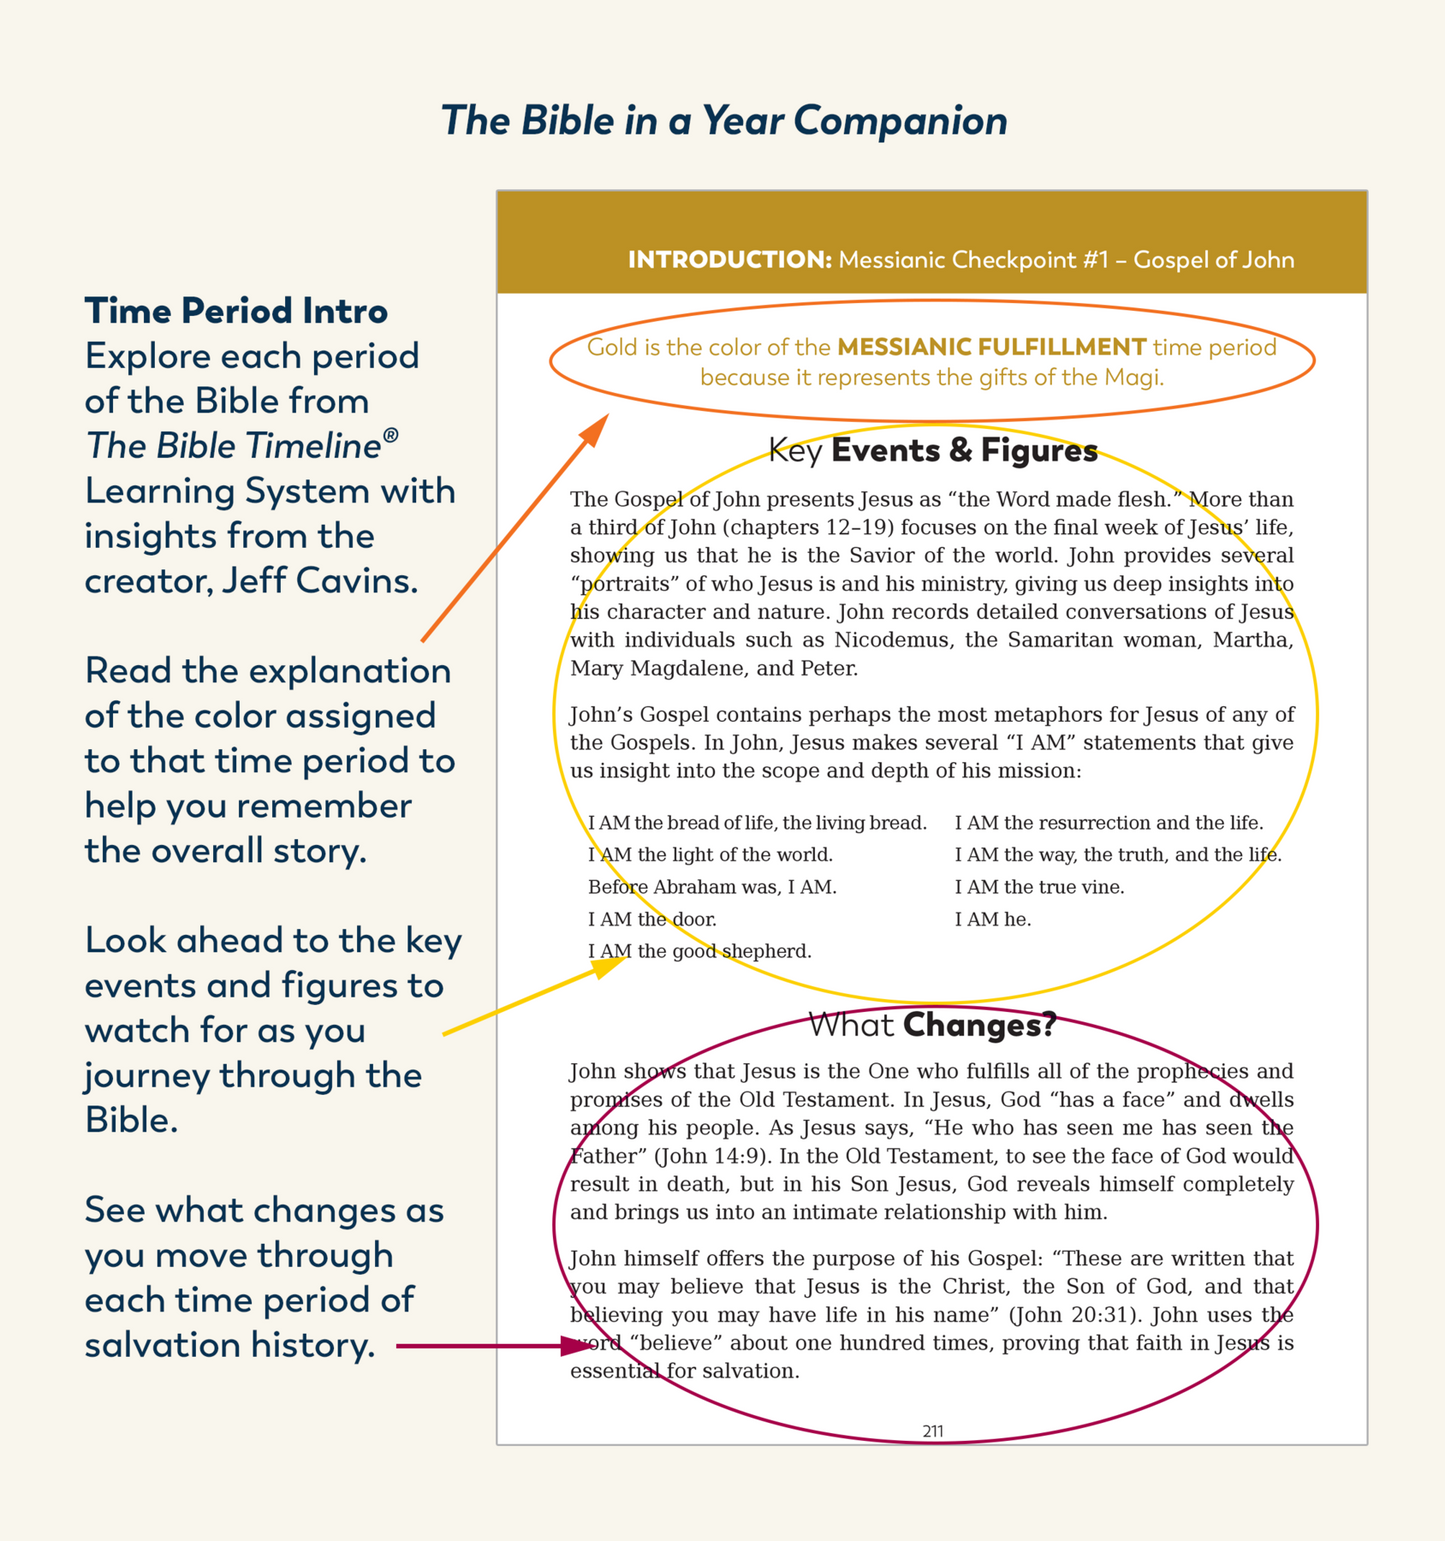 PREORDER   Bible in a Year Companion, Volume I: Days 1-120. *Being Reprinted - Not Available Until Spring 2024**